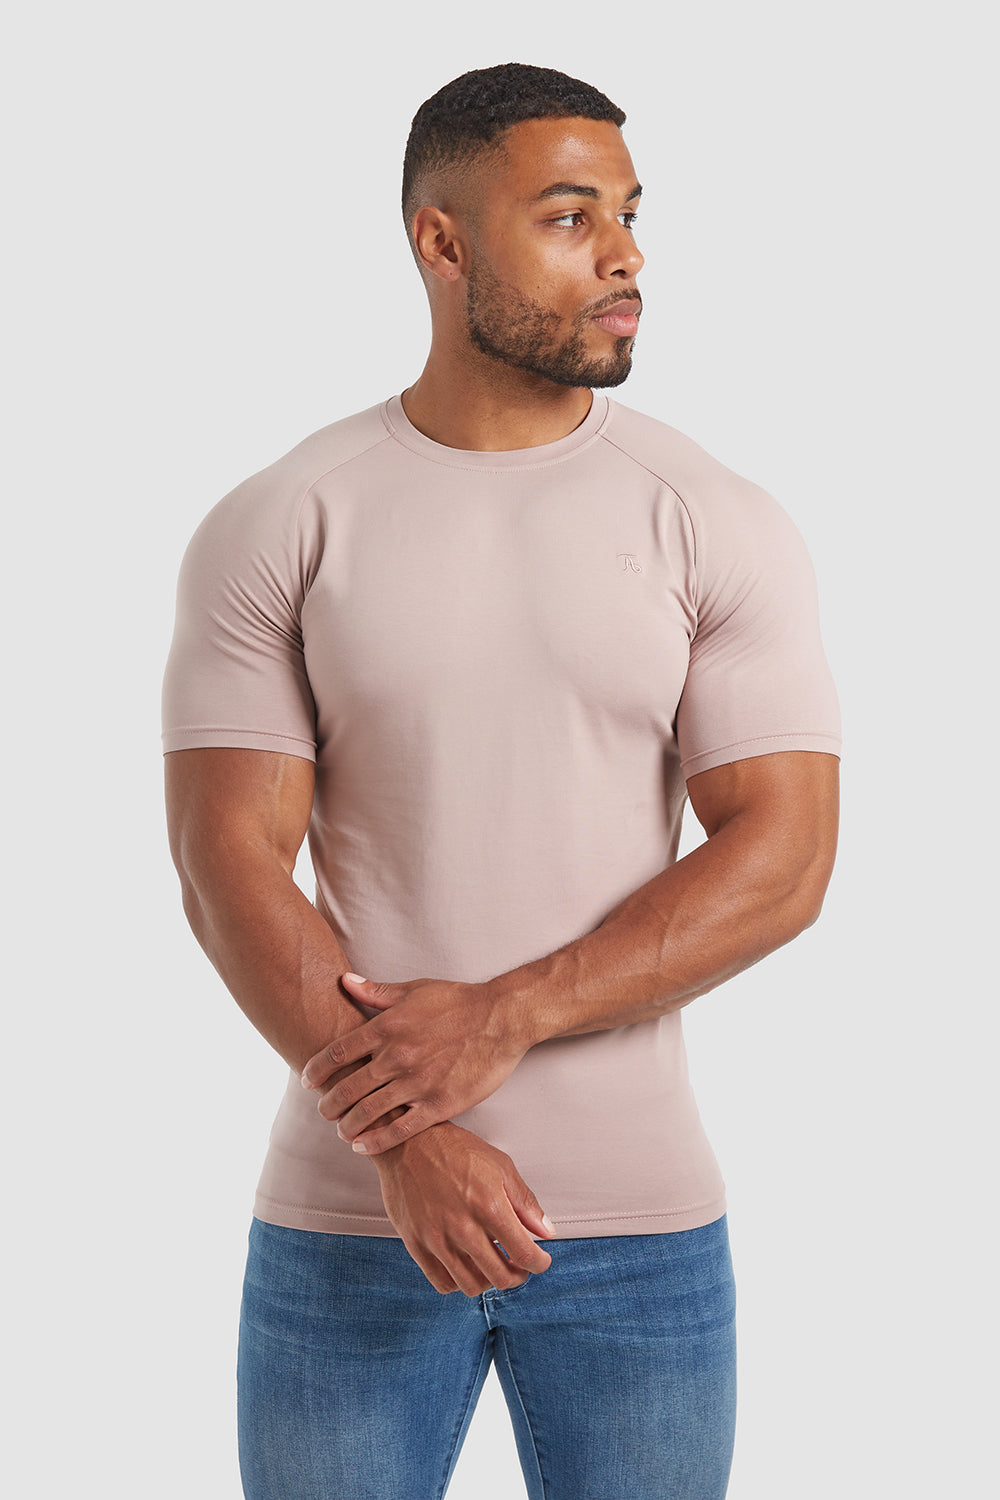 Muscle Fit T-Shirt in Plaster - TAILORED ATHLETE - ROW